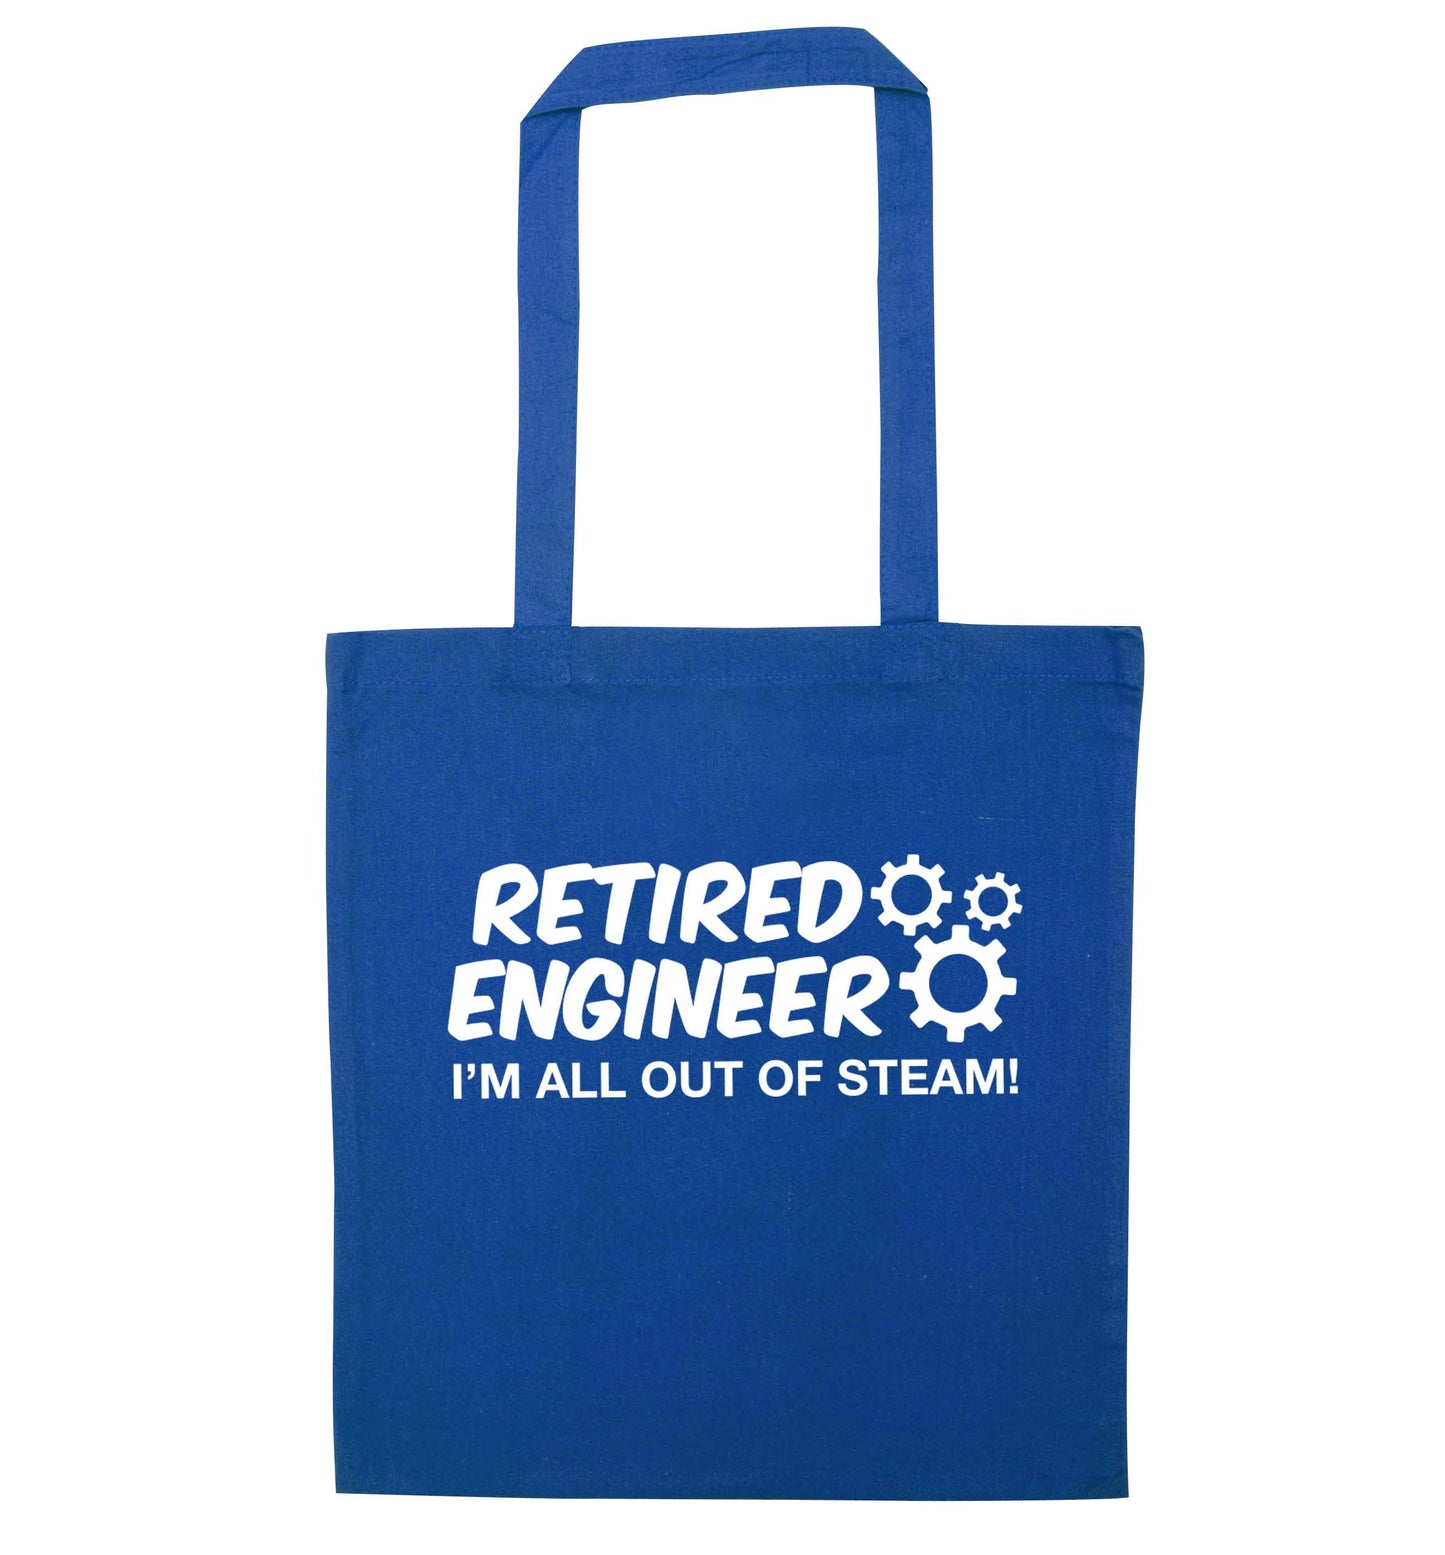 Retired engineer I'm all out of steam blue tote bag